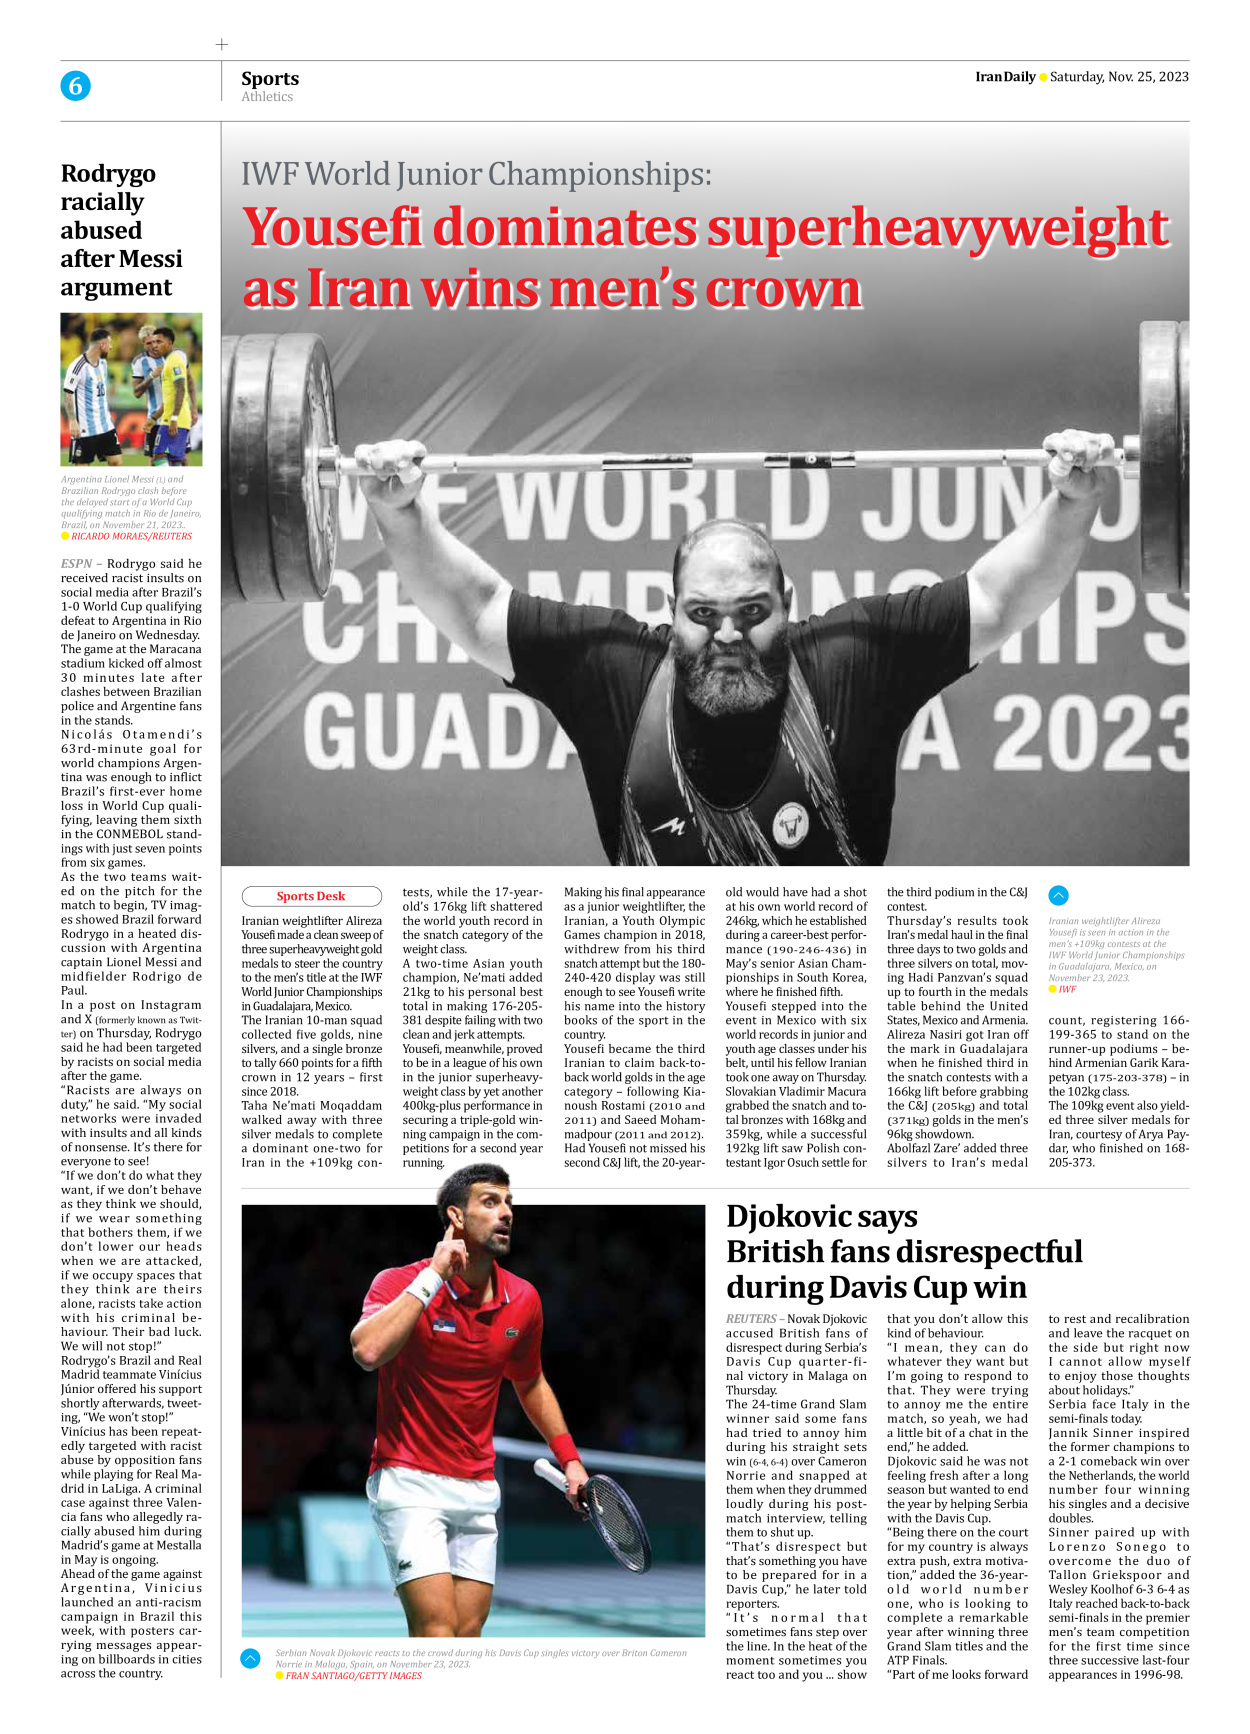 Iran Daily - Number Seven Thousand Four Hundred and Forty Three - 25 November 2023 - Page 6